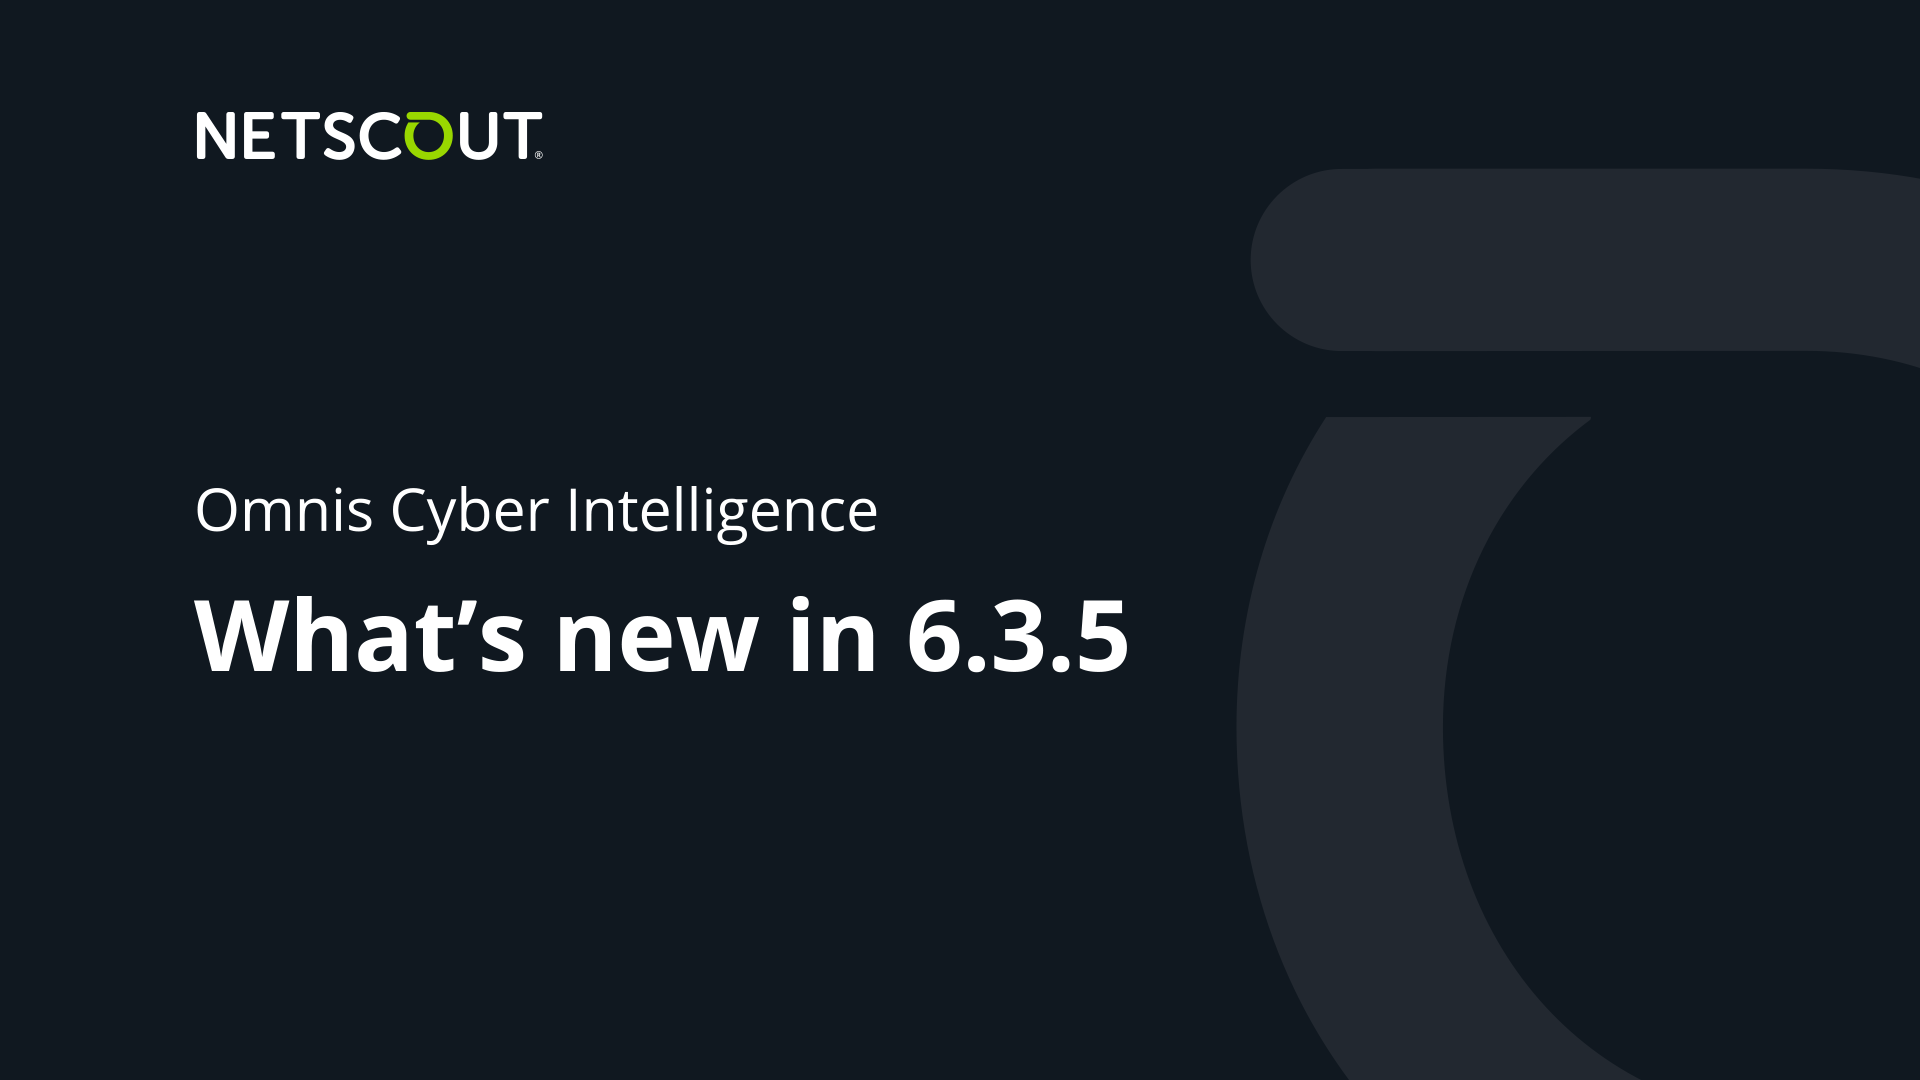 Omnis Cyber Intelligence - What's New in 6.3.5